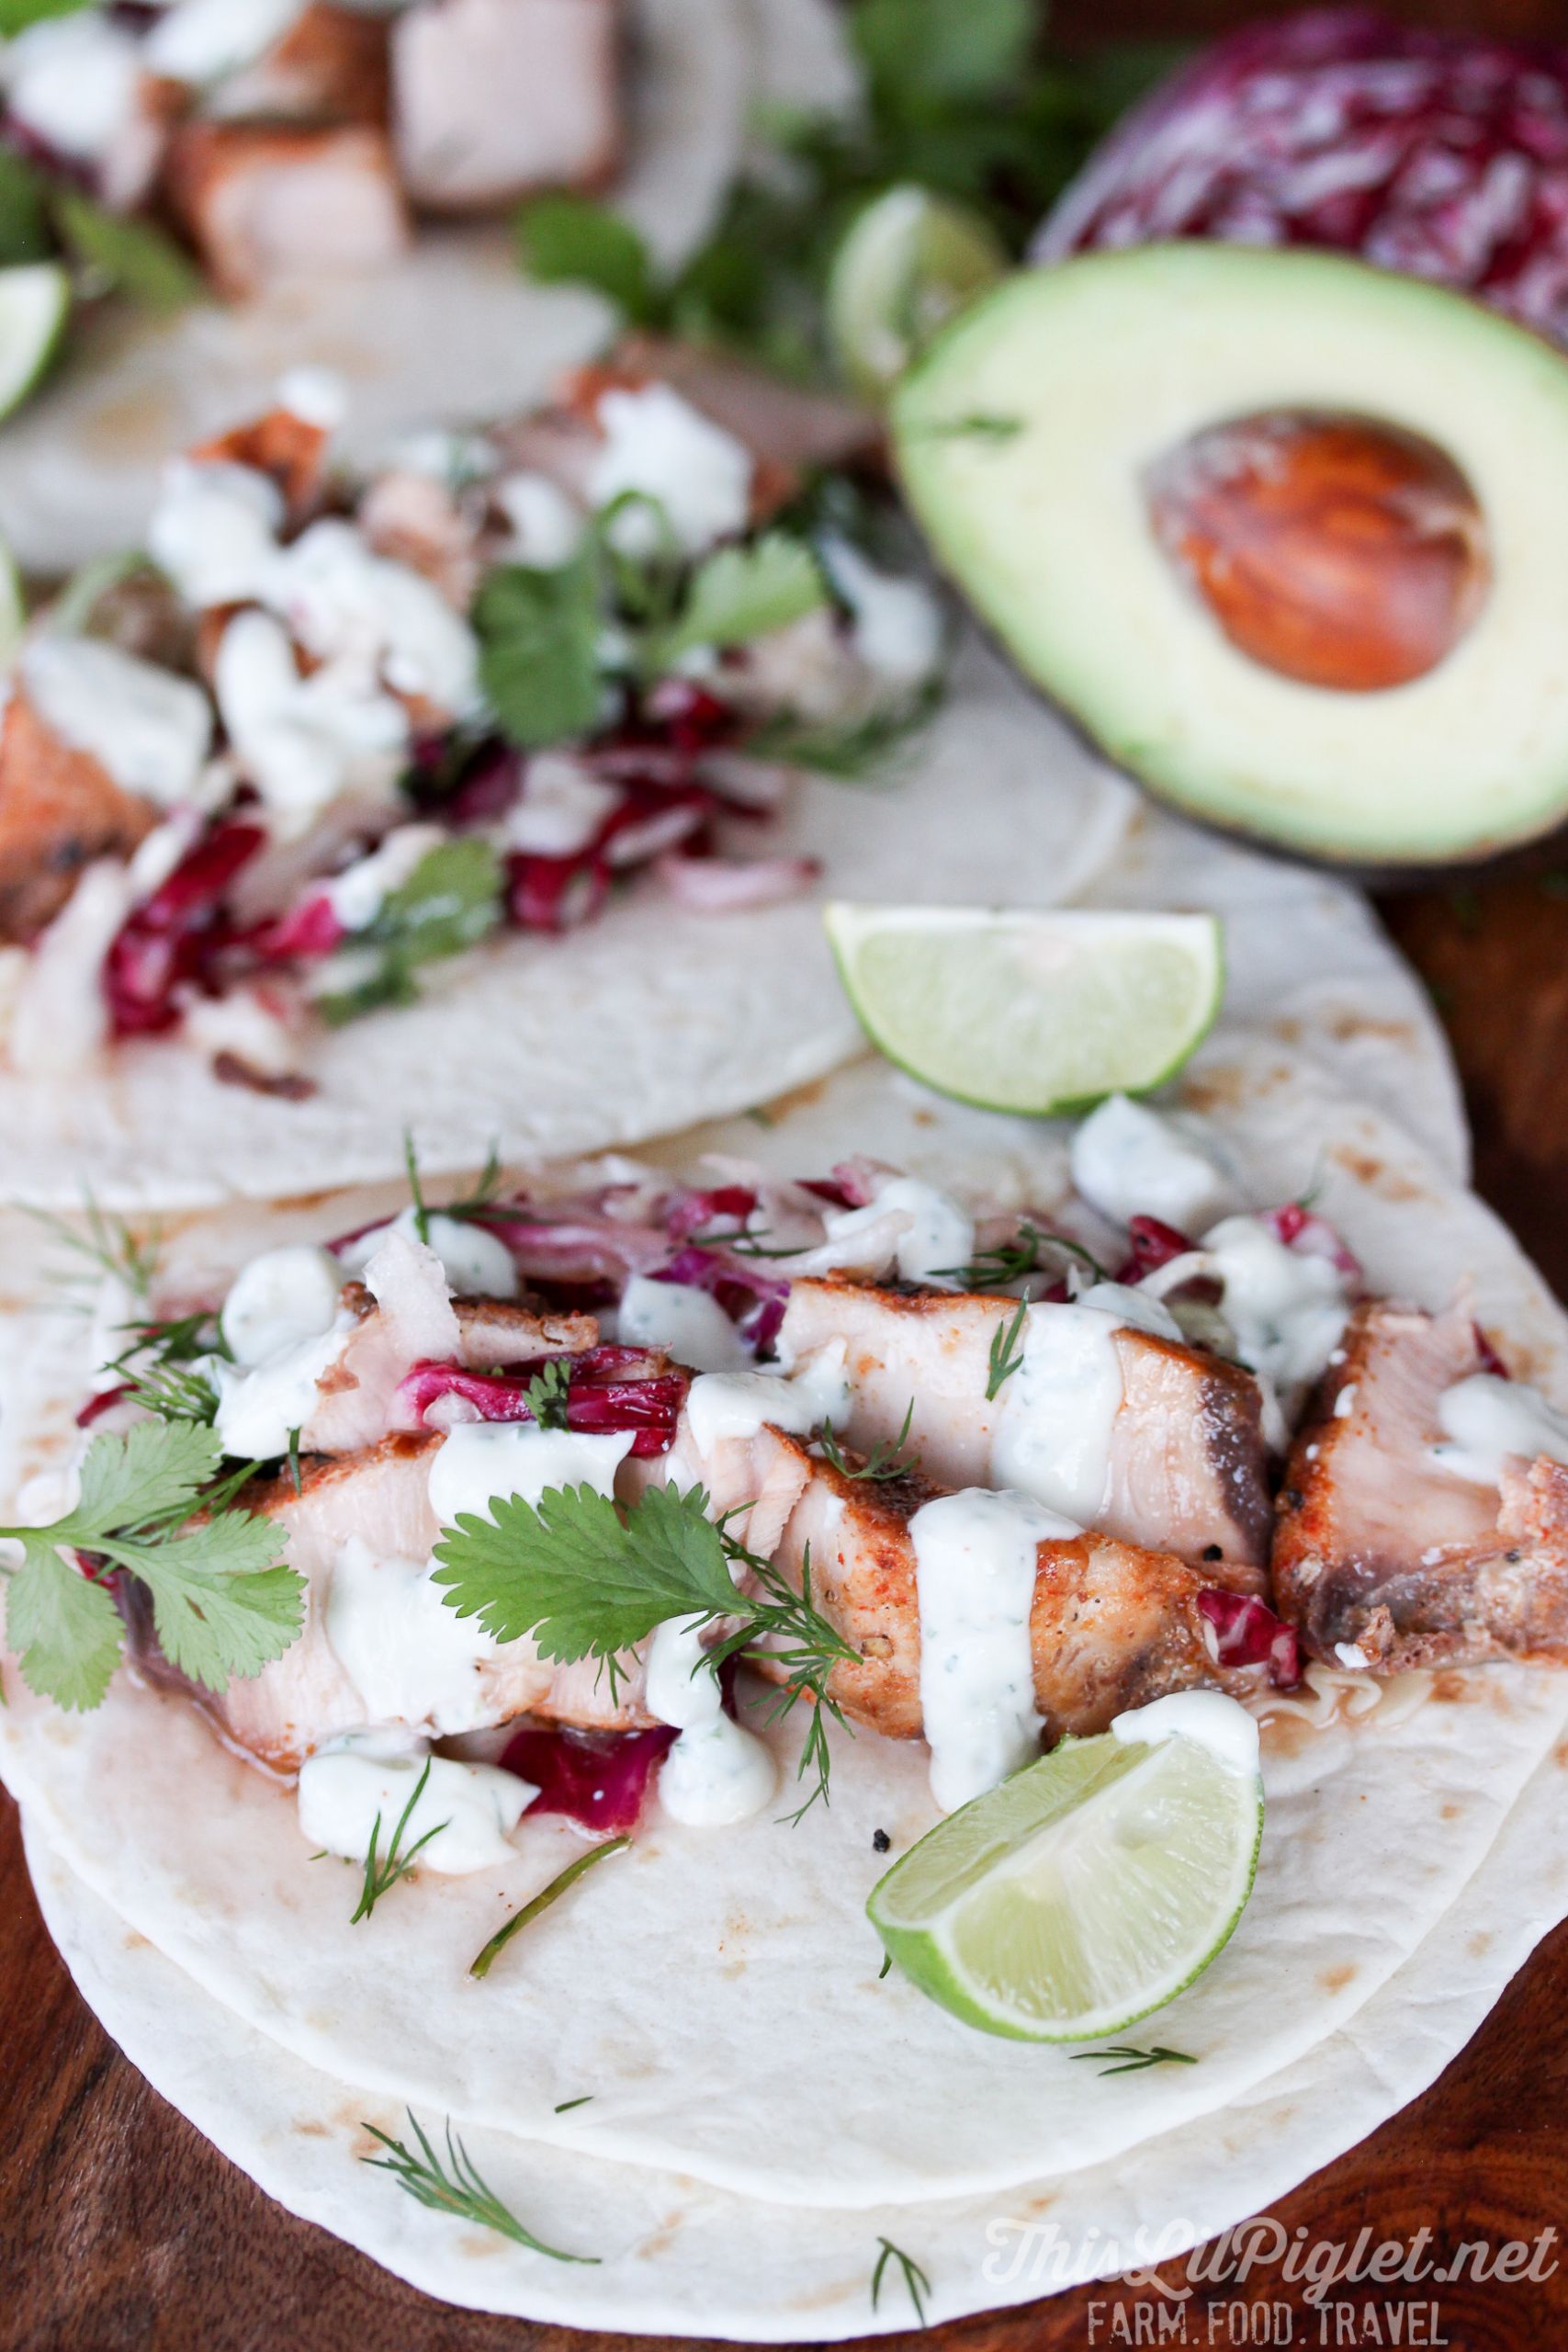 Marlin Fish Recipes
 Marlin Fish Tacos with Lime Dill Sauce This Lil Piglet